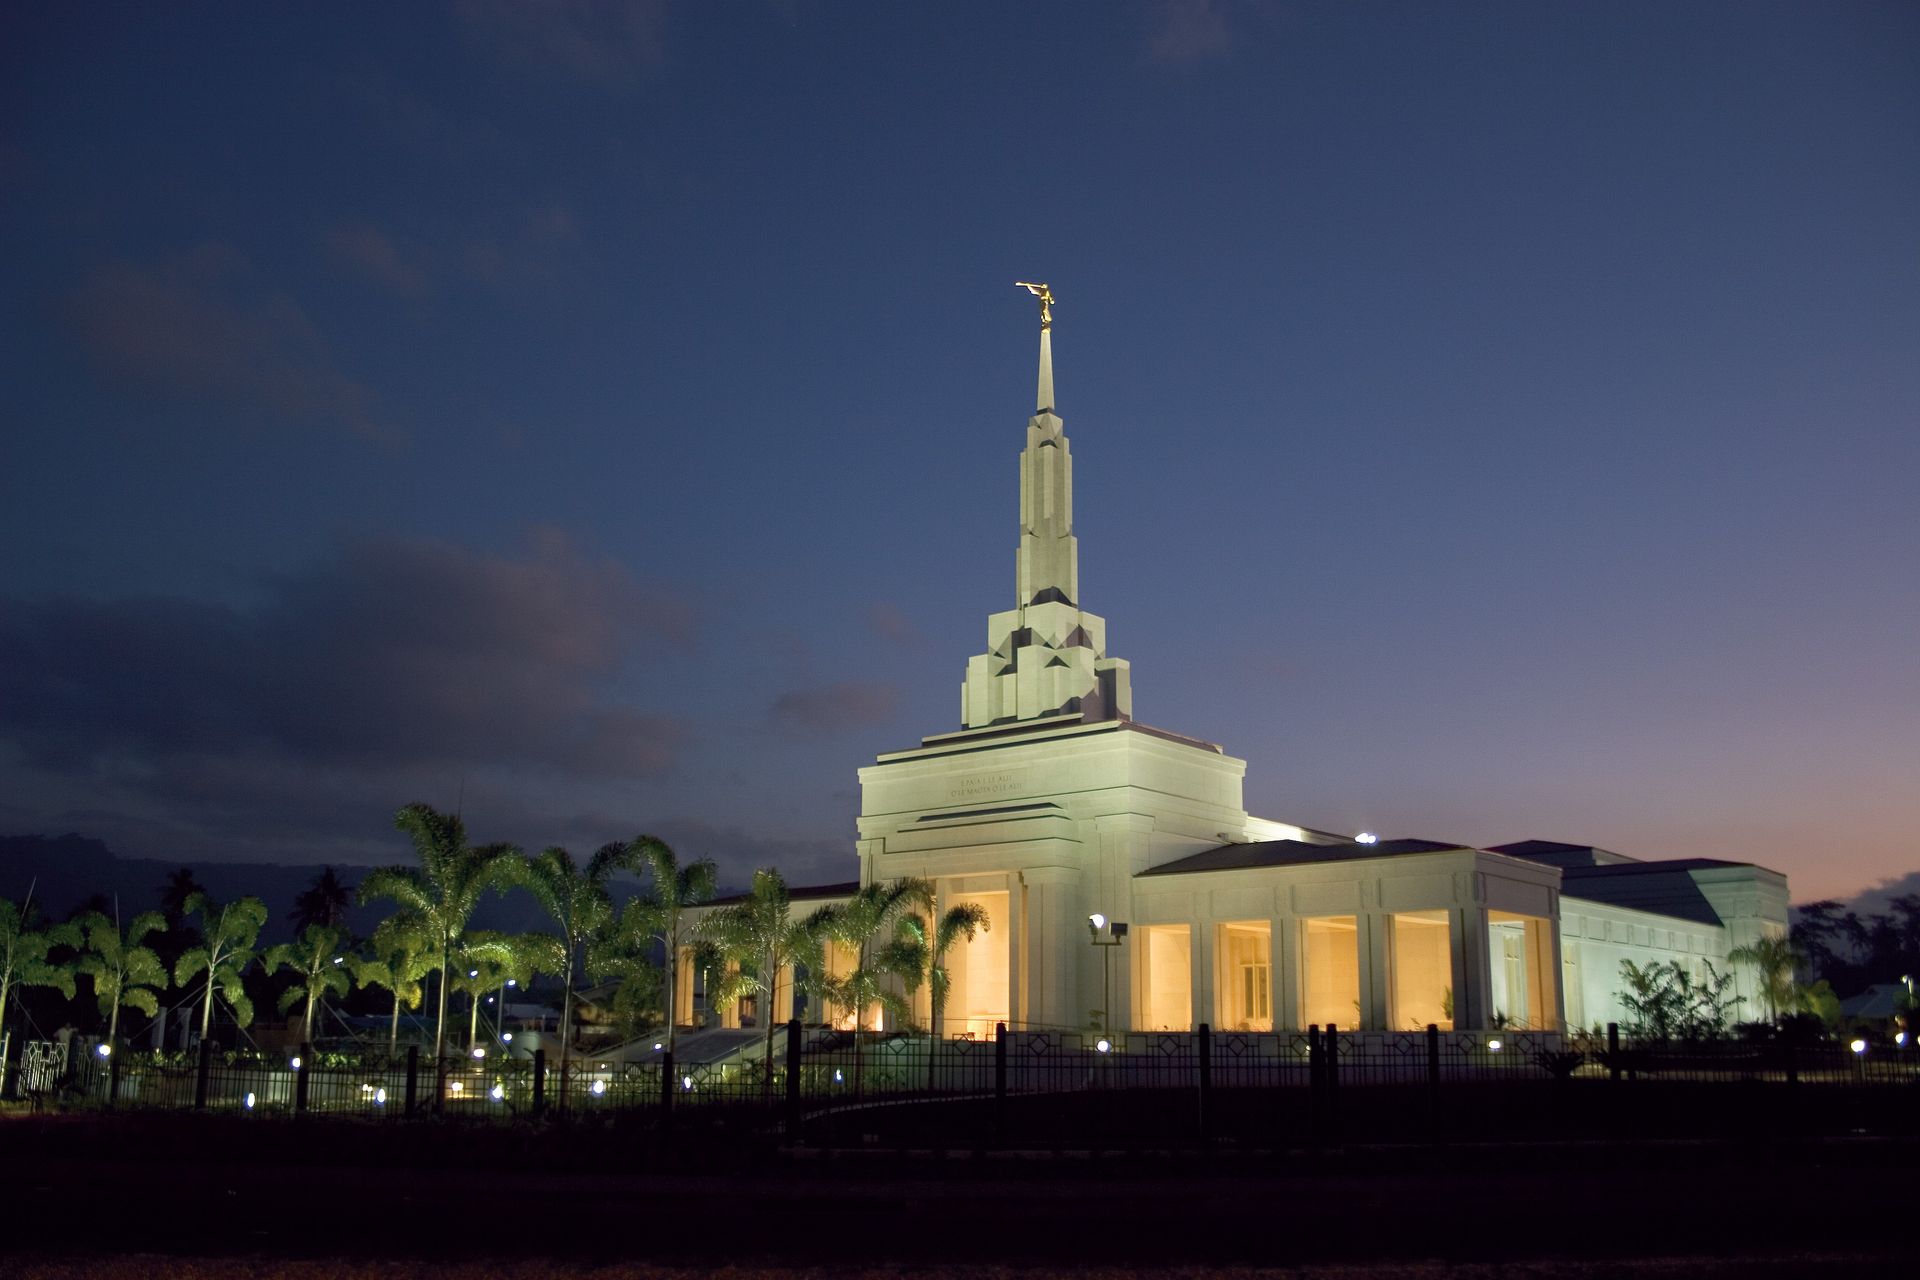 The Apia Samoa Temple and temple grounds are lit up at night.